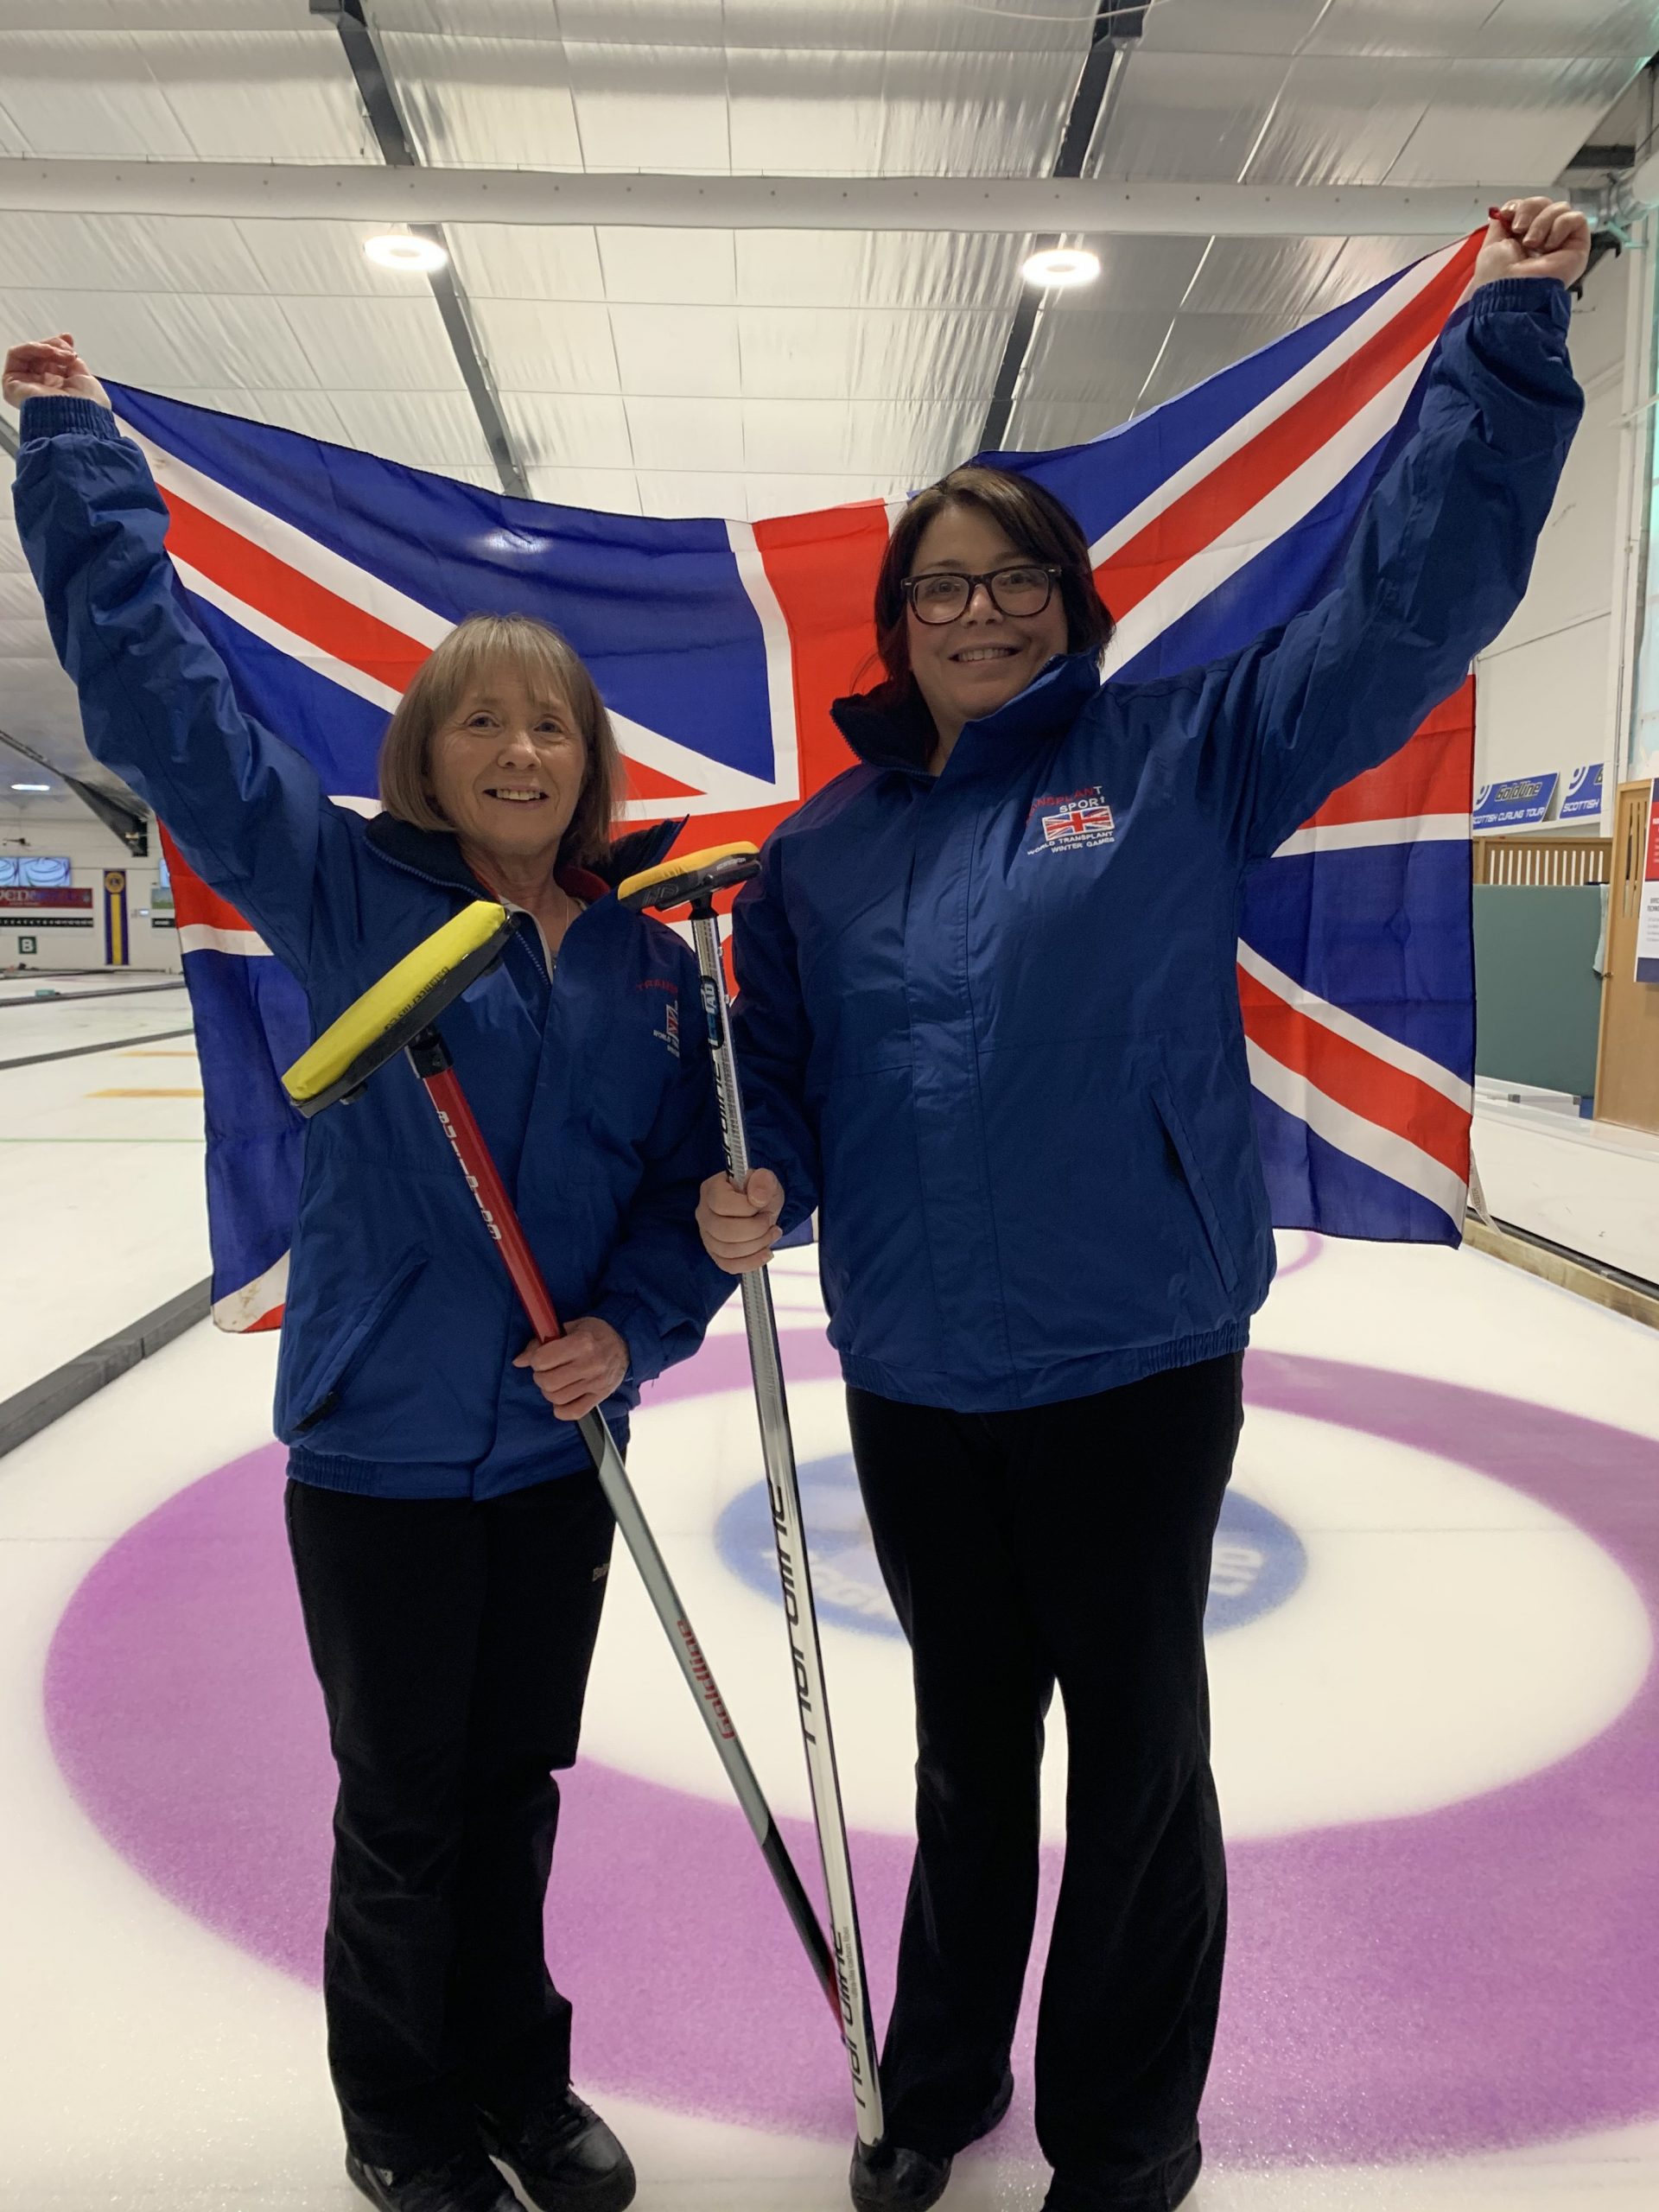 Curling duo are going for gold